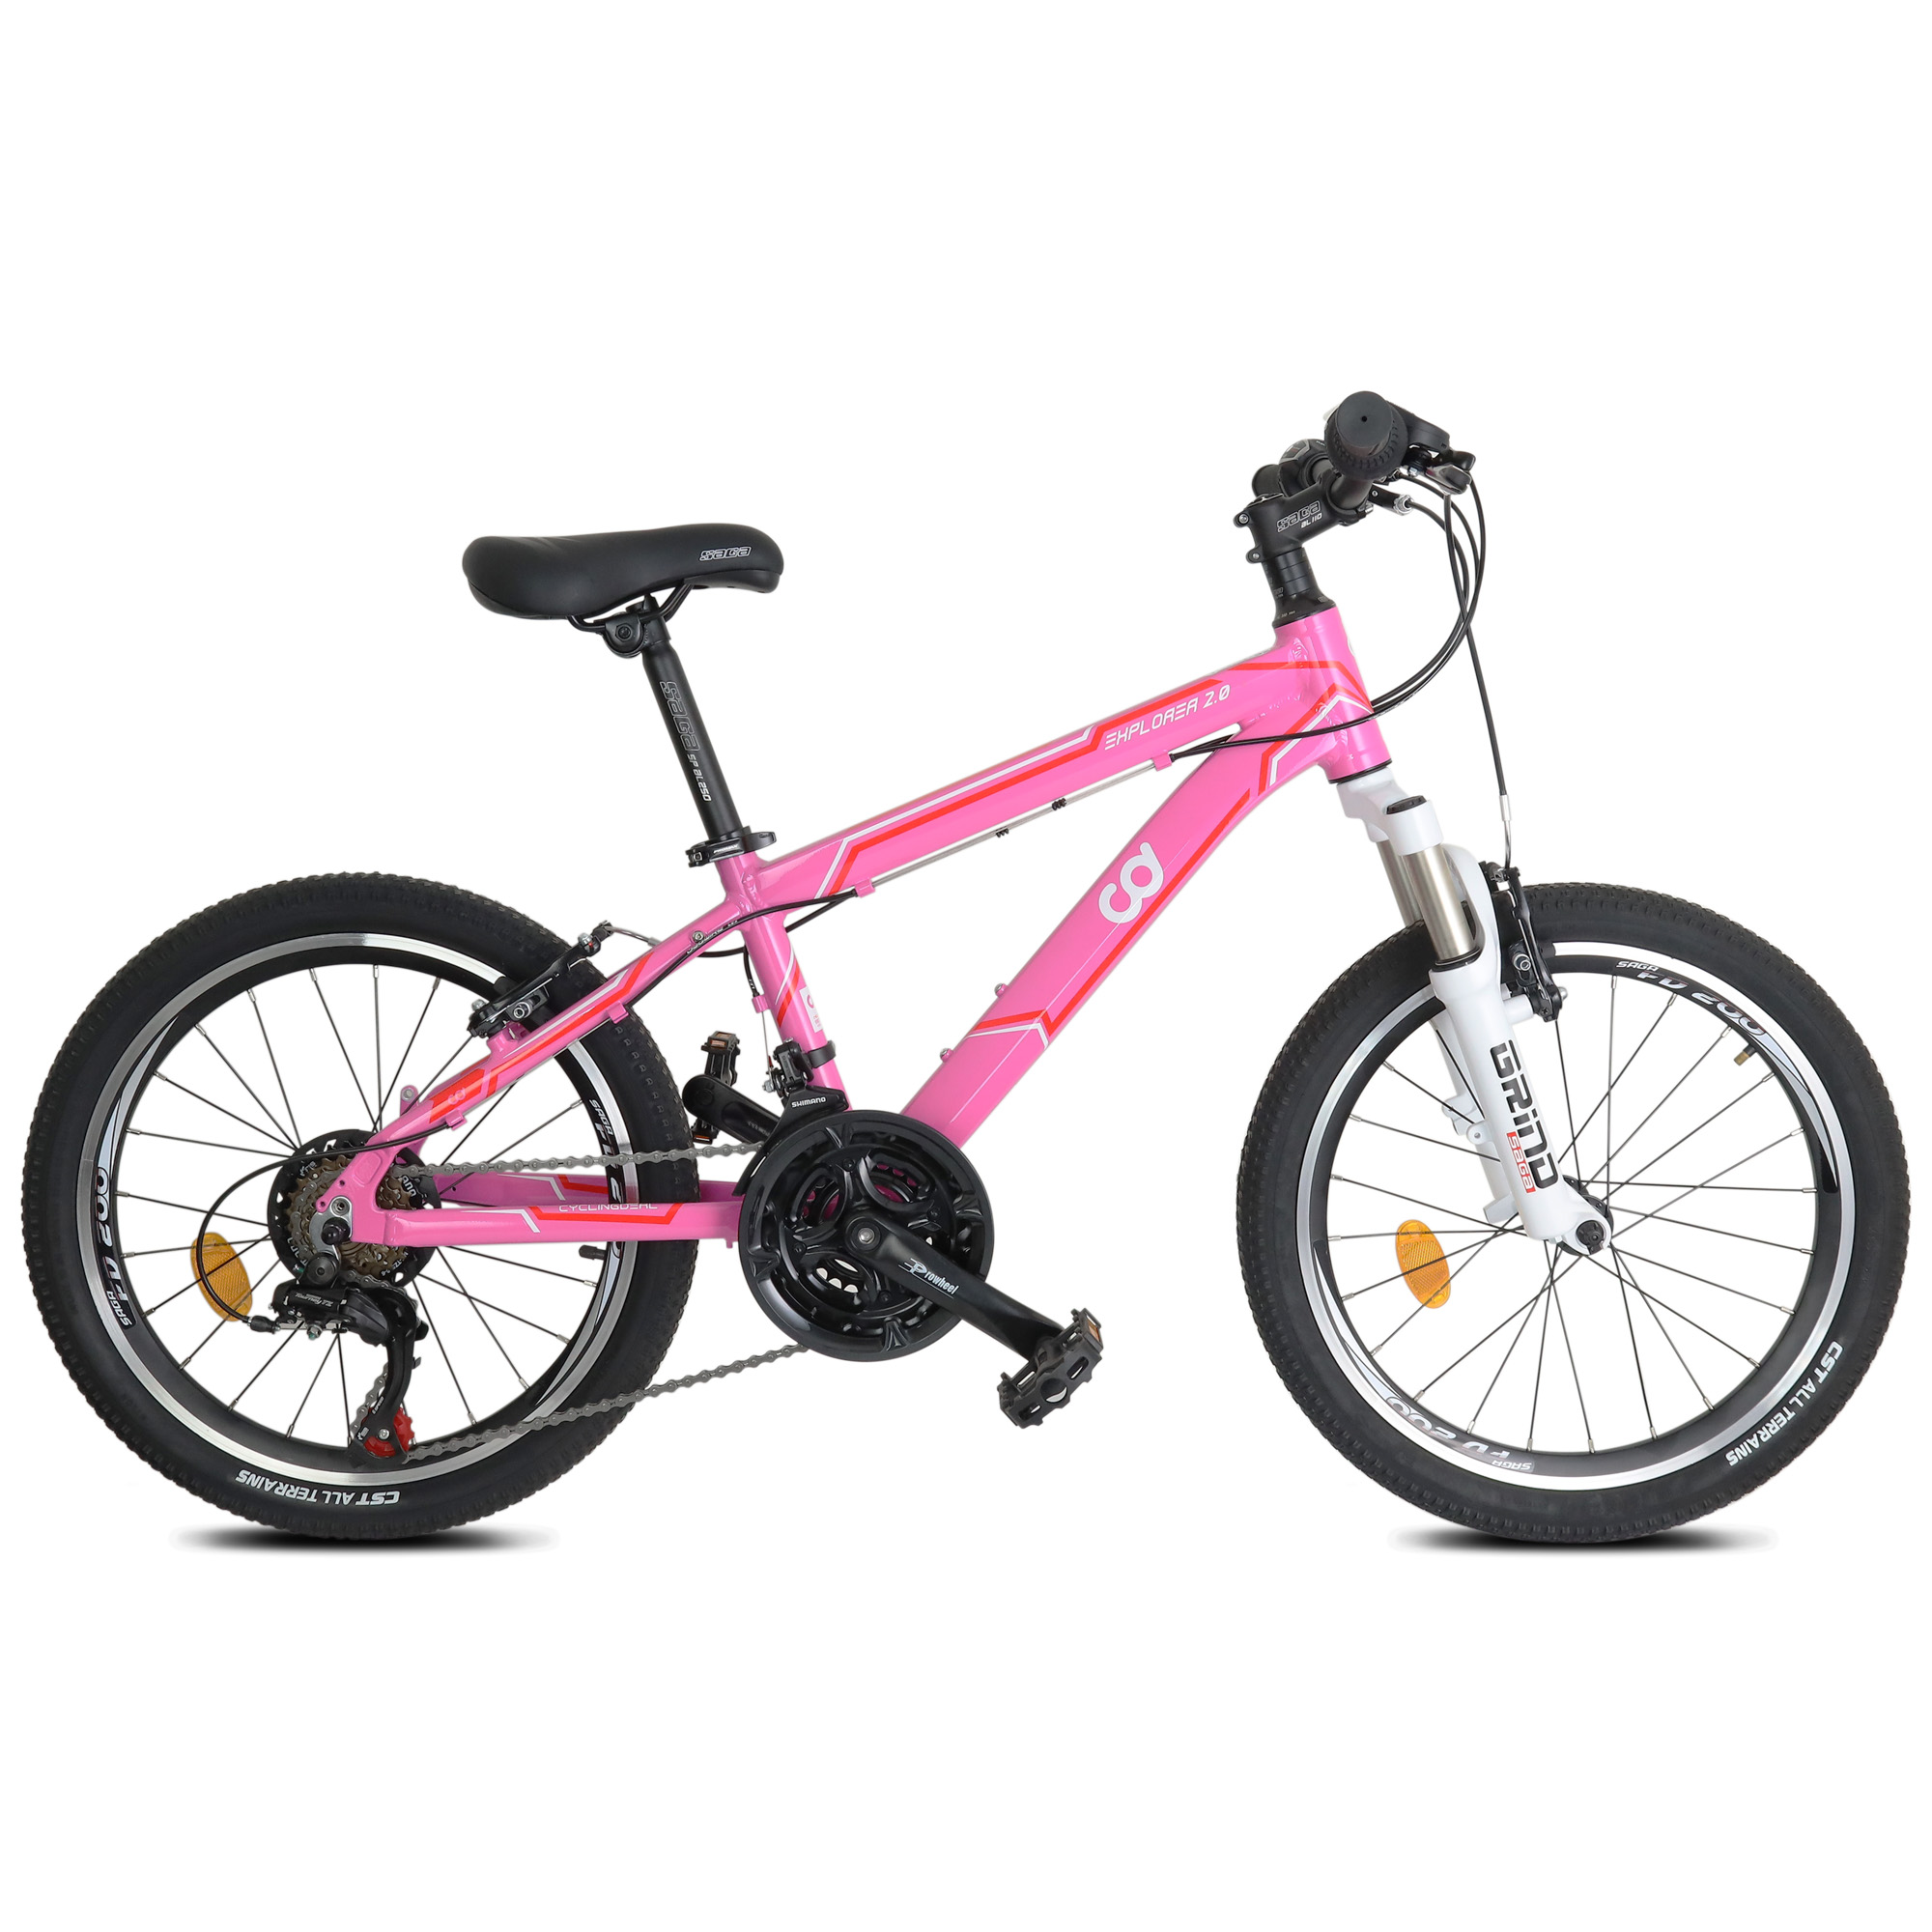 CyclingDeal Kids Children Mountain Bike Bicycle MTB Pink with Detachable Training Wheels - 18 Speed 20" Wheels 12" Frame for 5-10 Years Old